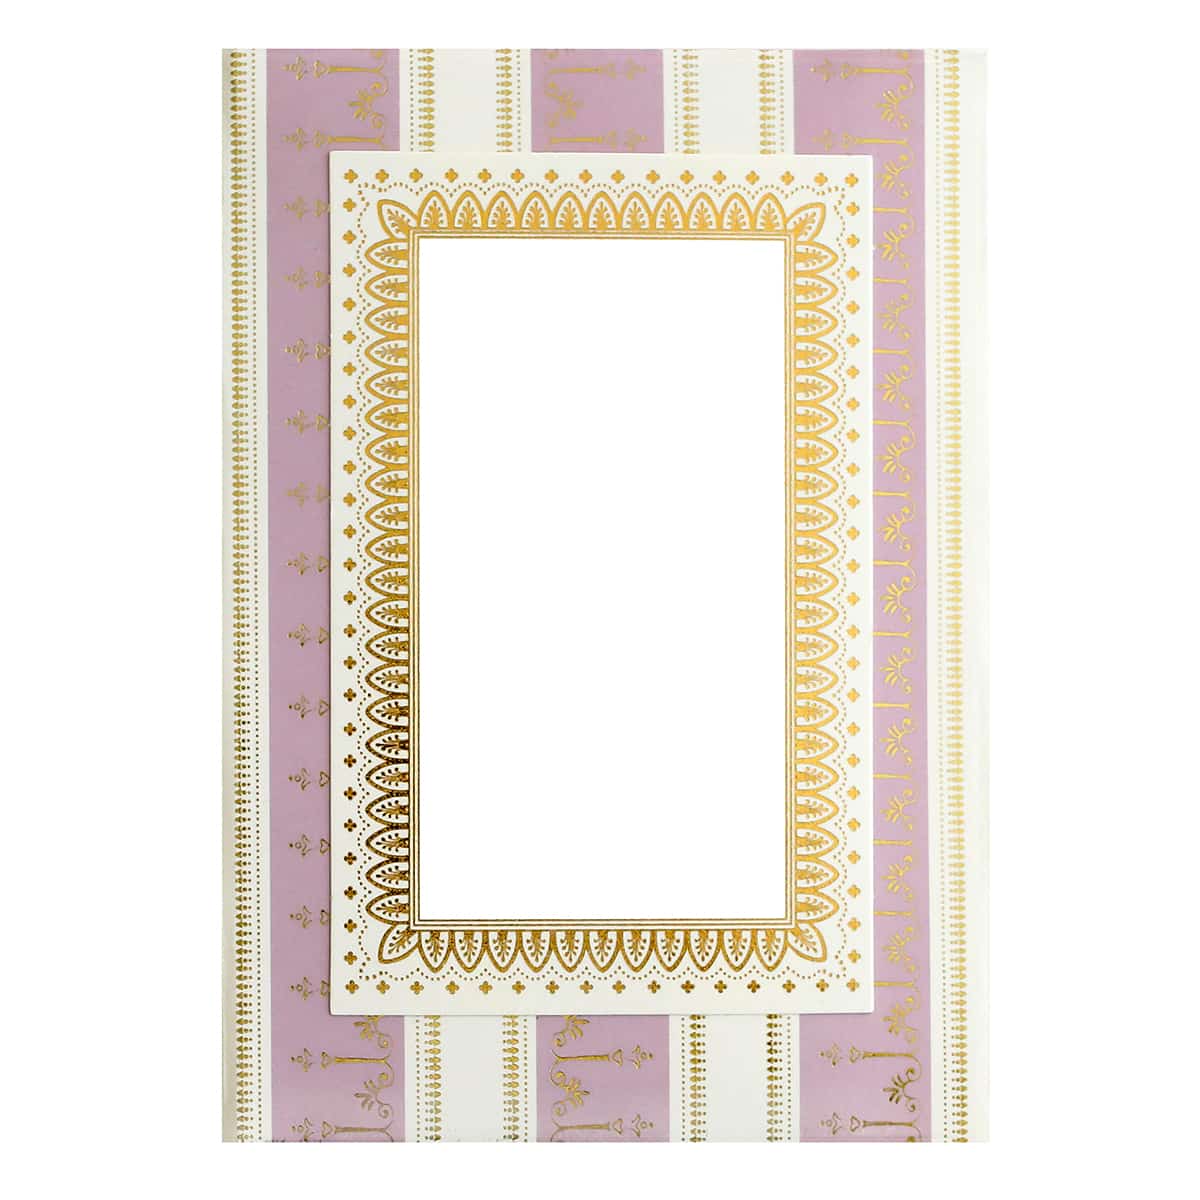 a picture frame with a gold border on a pink and white striped background.